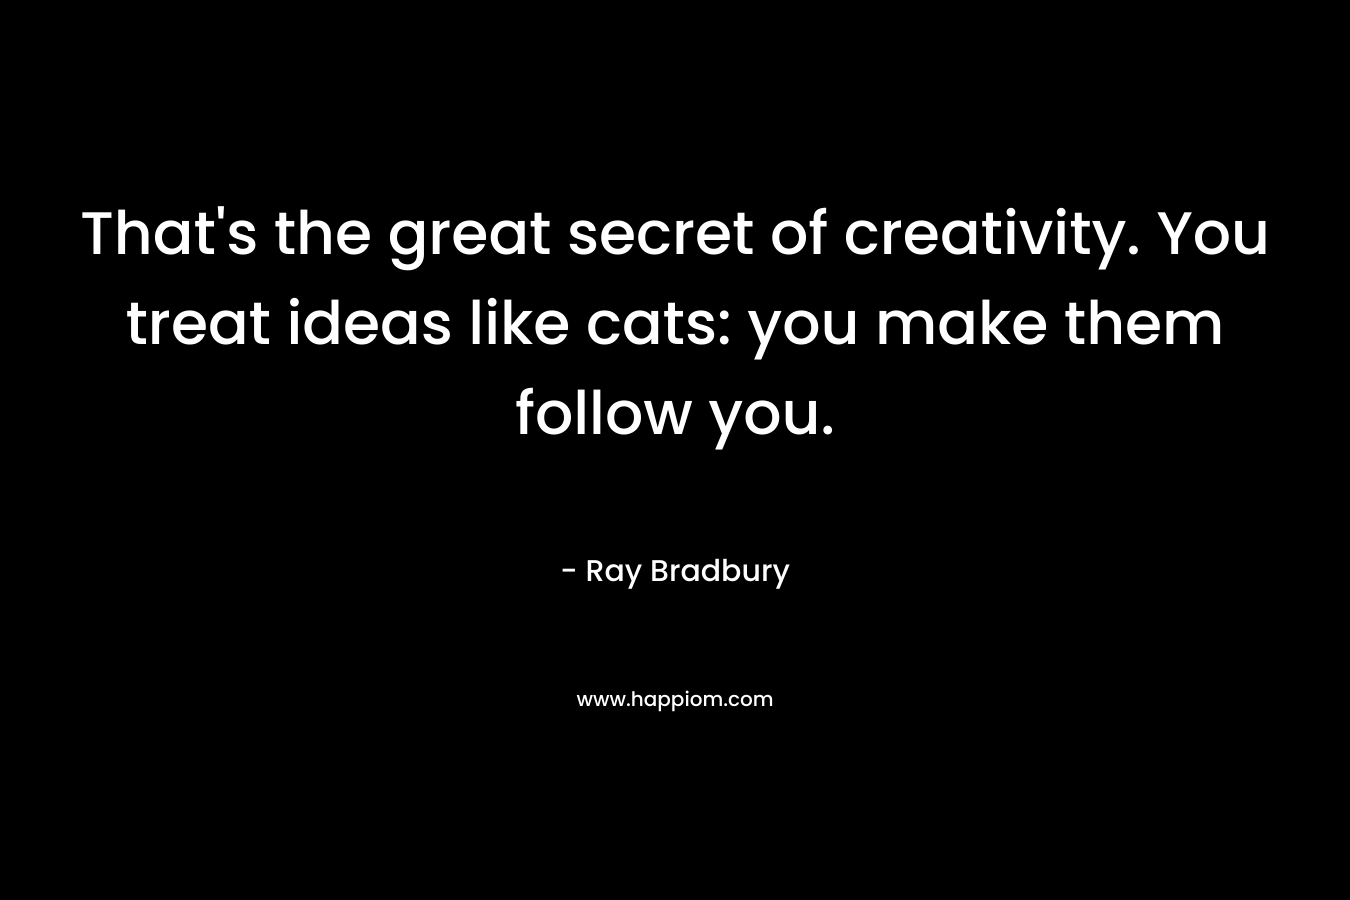 That's the great secret of creativity. You treat ideas like cats: you make them follow you.